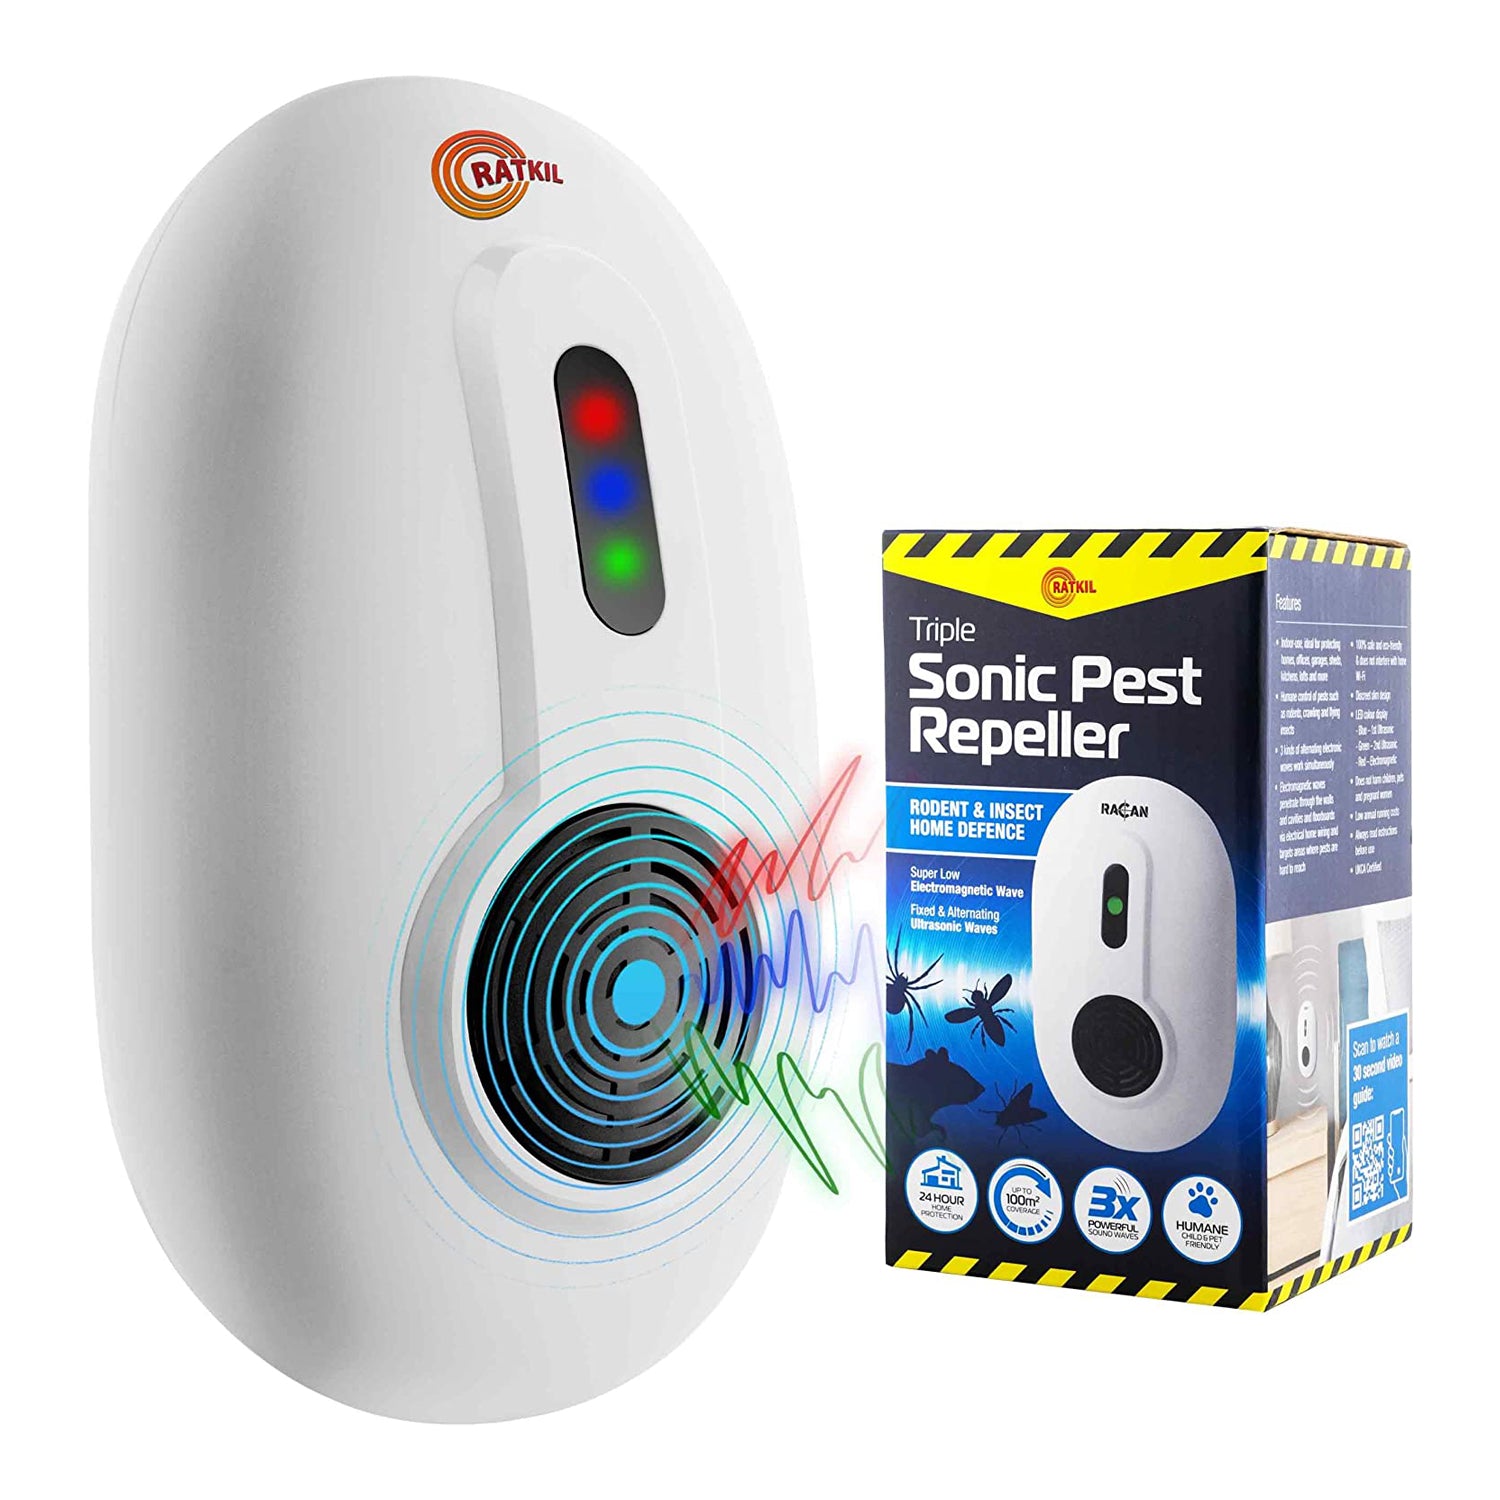 Ultrasonic Pest Repeller - Powerful Mouse Repellent & Insect Repellent - 3 Working Modes - Wide Frequency Range Pest Control Device | Ideal for Mice, Rats, Mosquitoes, Moths, Ants